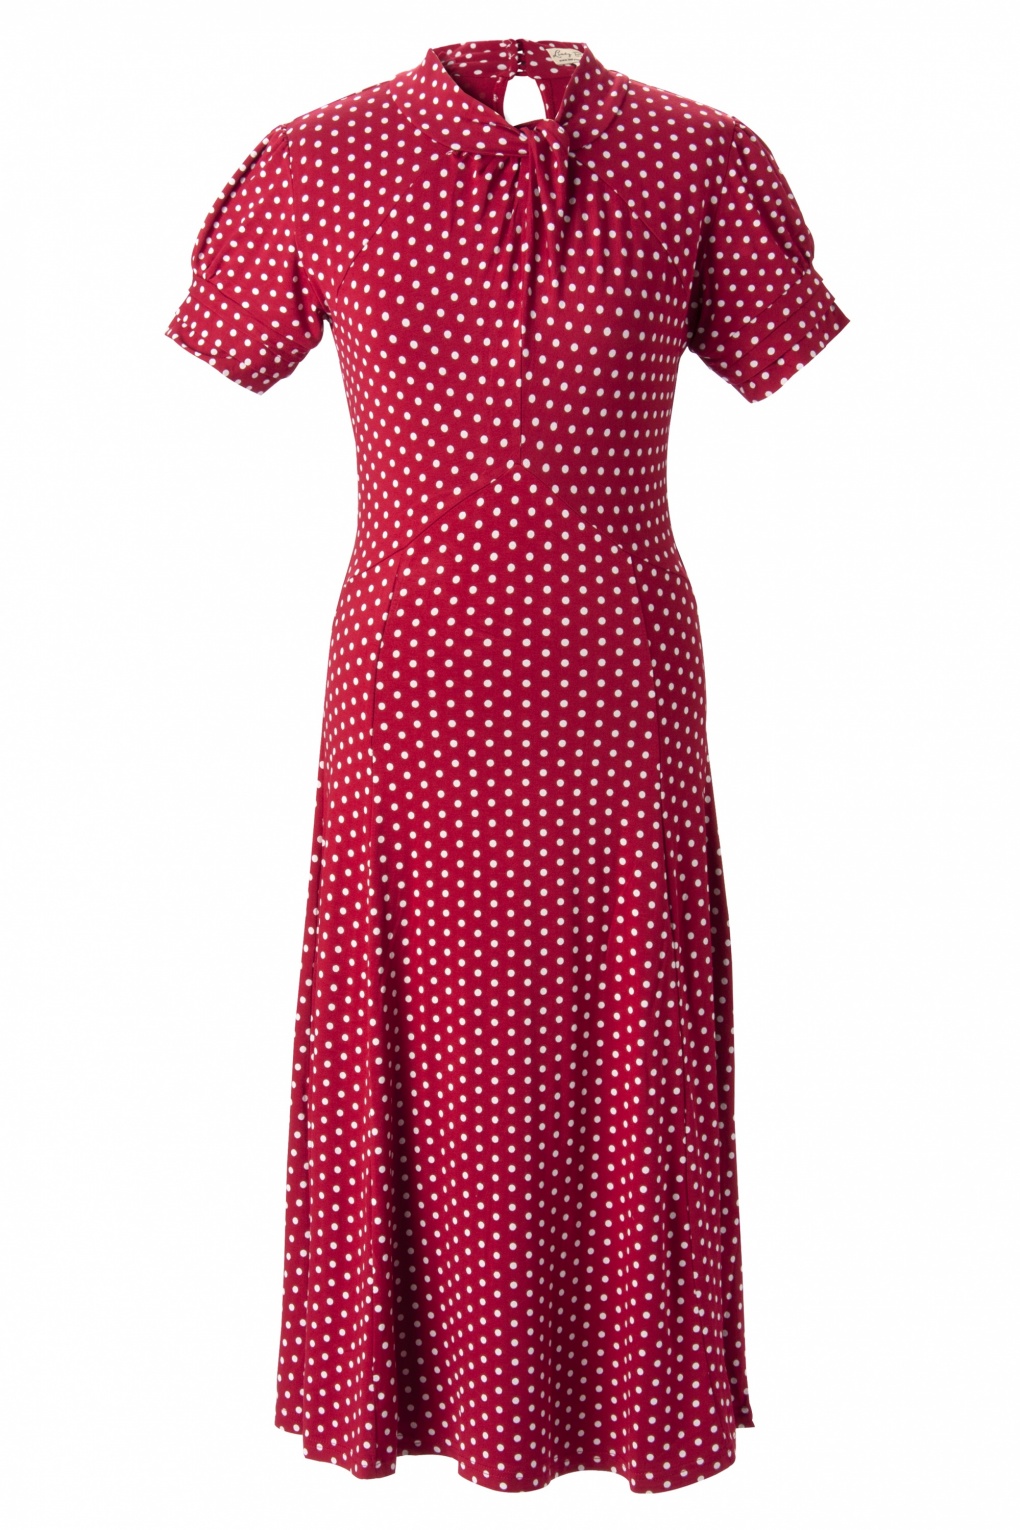 1940's 1950's Amie Classy Red Vintage Polka Dot Flared